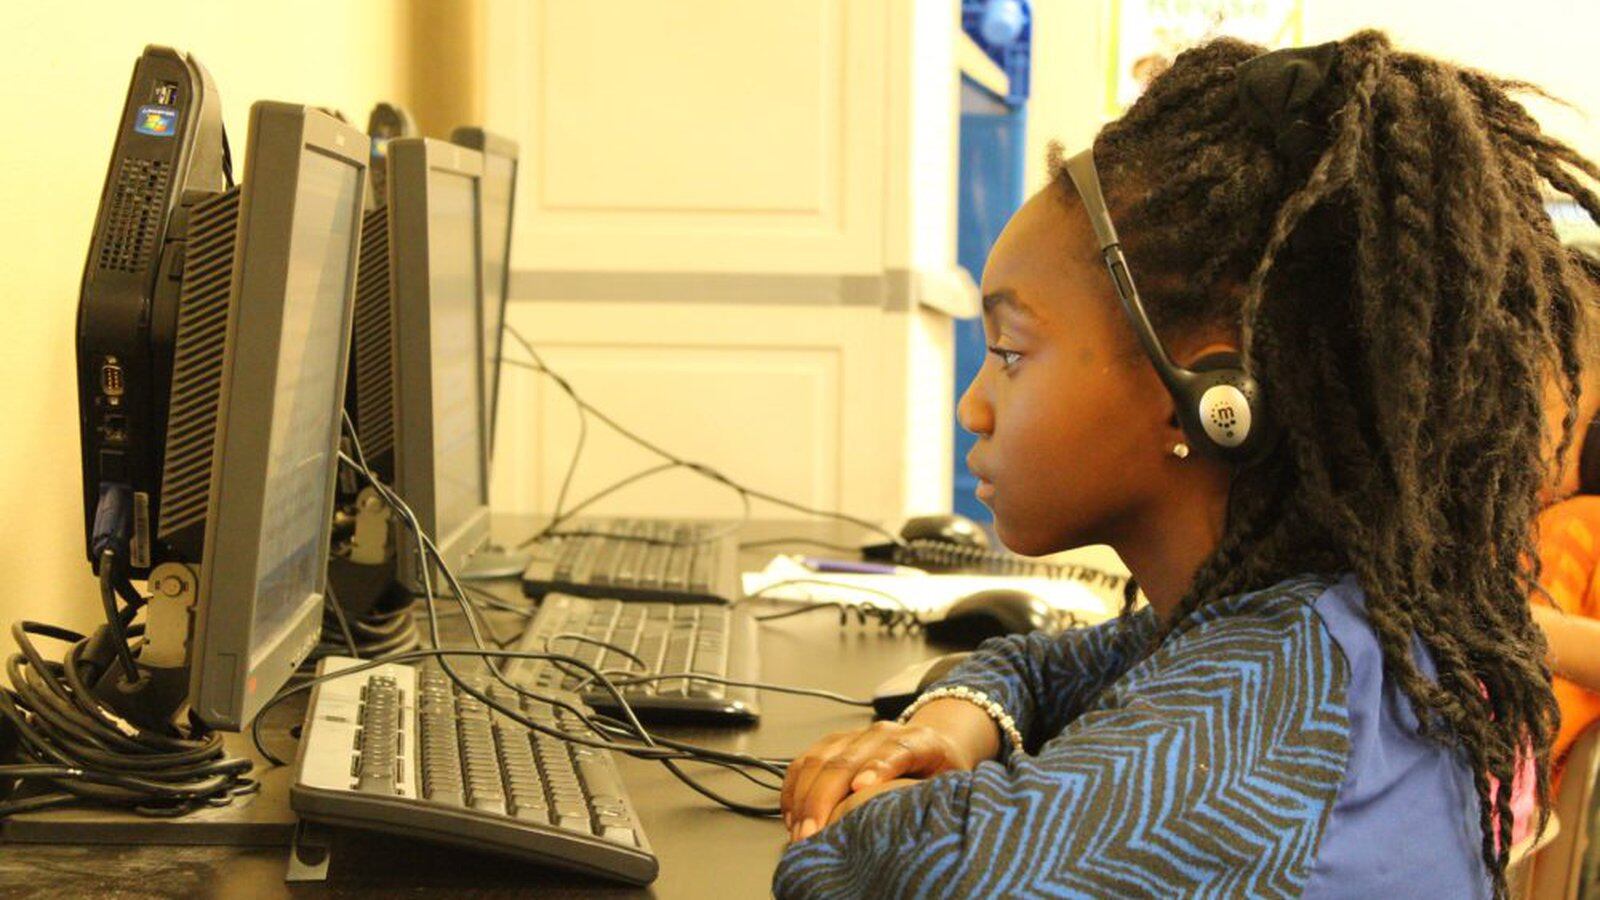 A HOPE Online student works during the day at an Aurora learning center. (Photo by Nicholas Garcia, Chalkbeat)